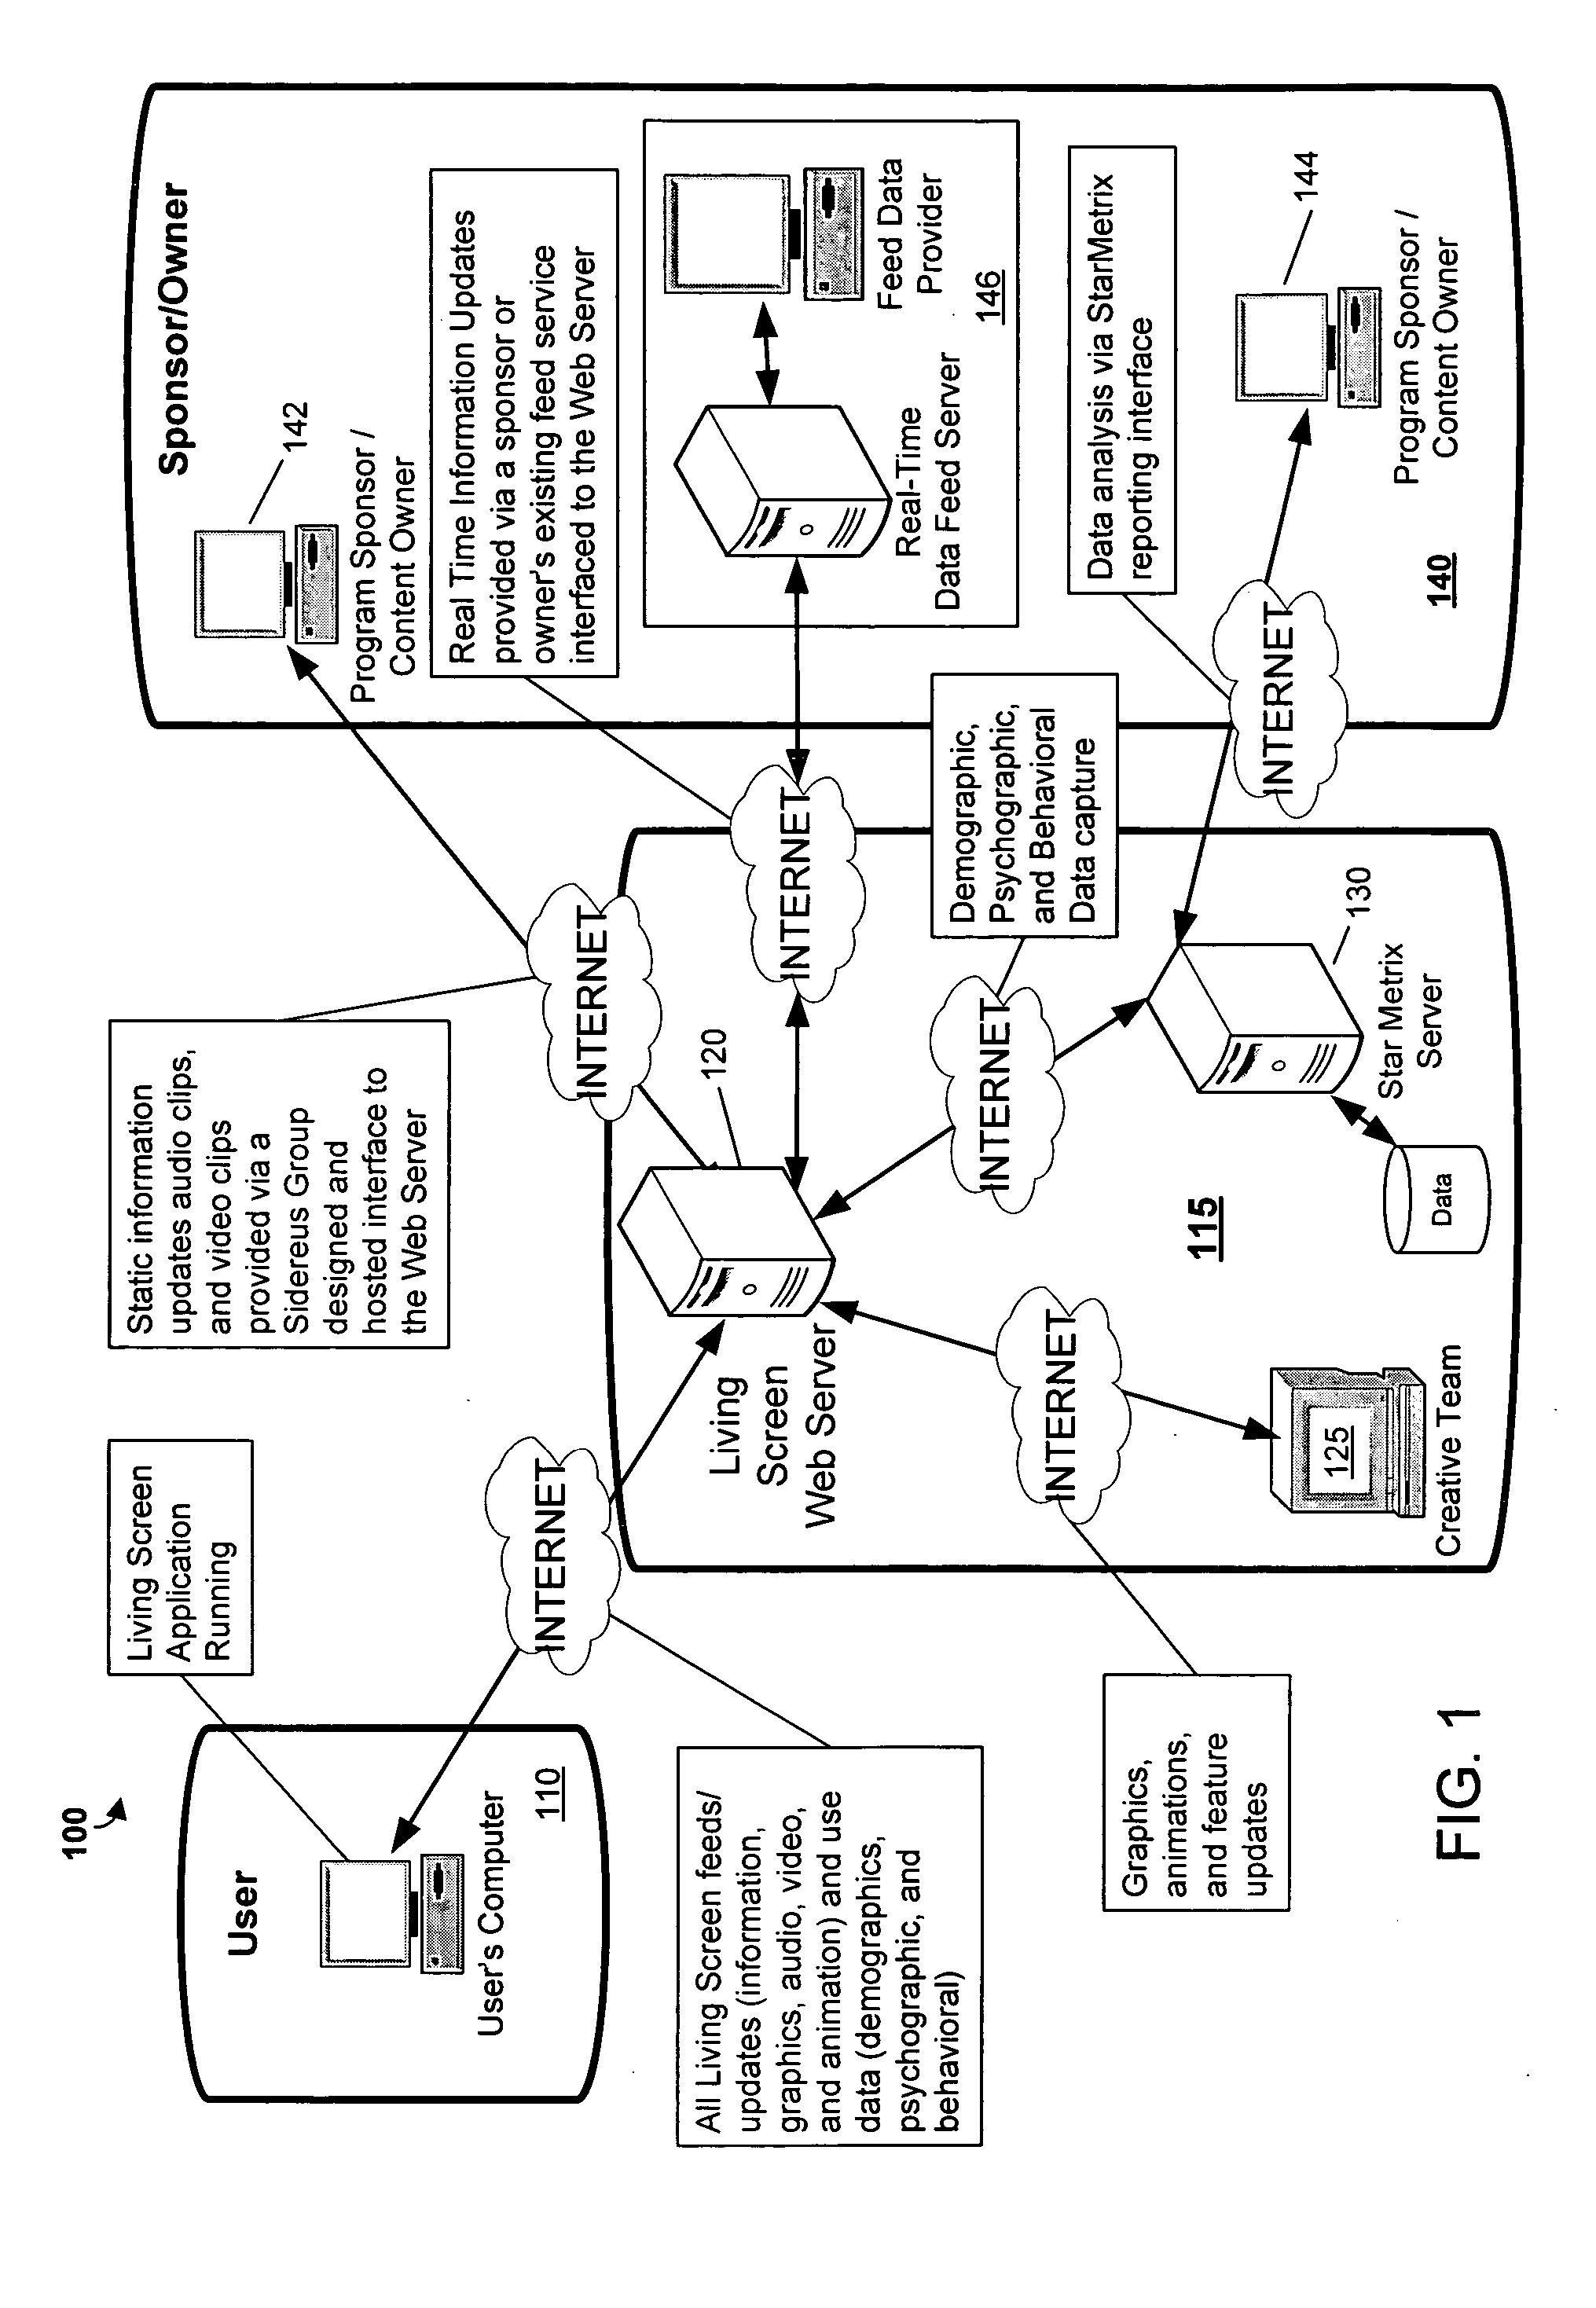 User controllable computer presentation of interfaces and information selectively provided via a network